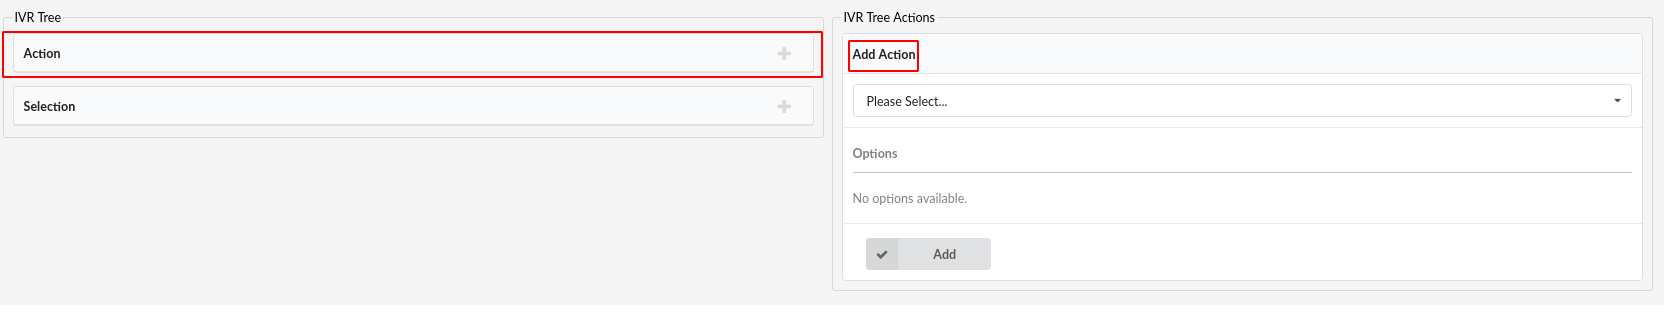 33-add-action-ivr.png